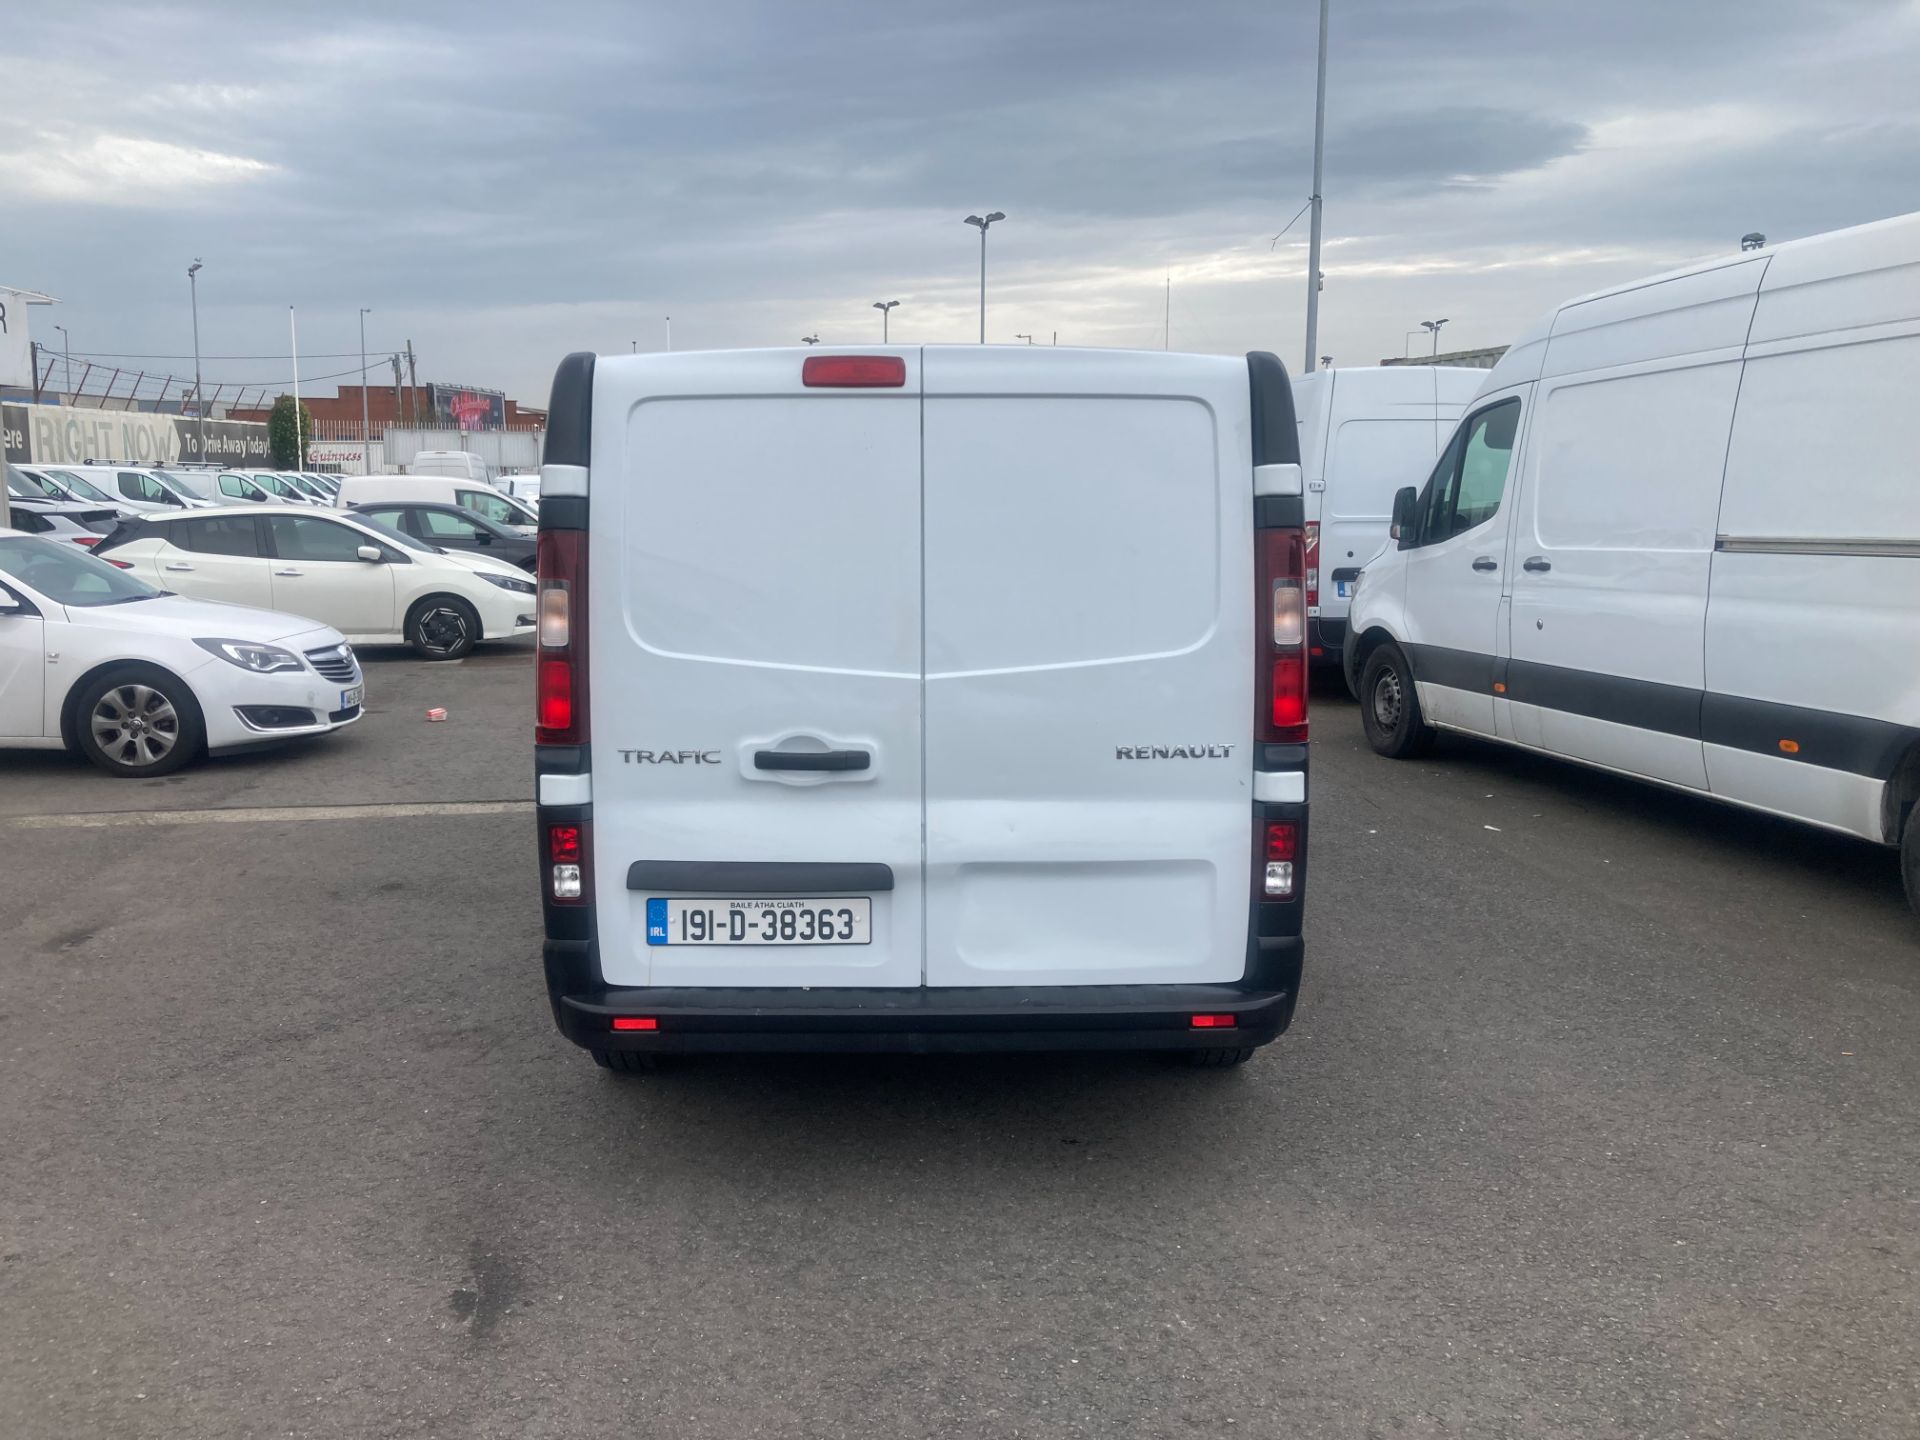 2019 Renault Trafic LL29 DCI 120 Business (191D38363) Thumbnail 6